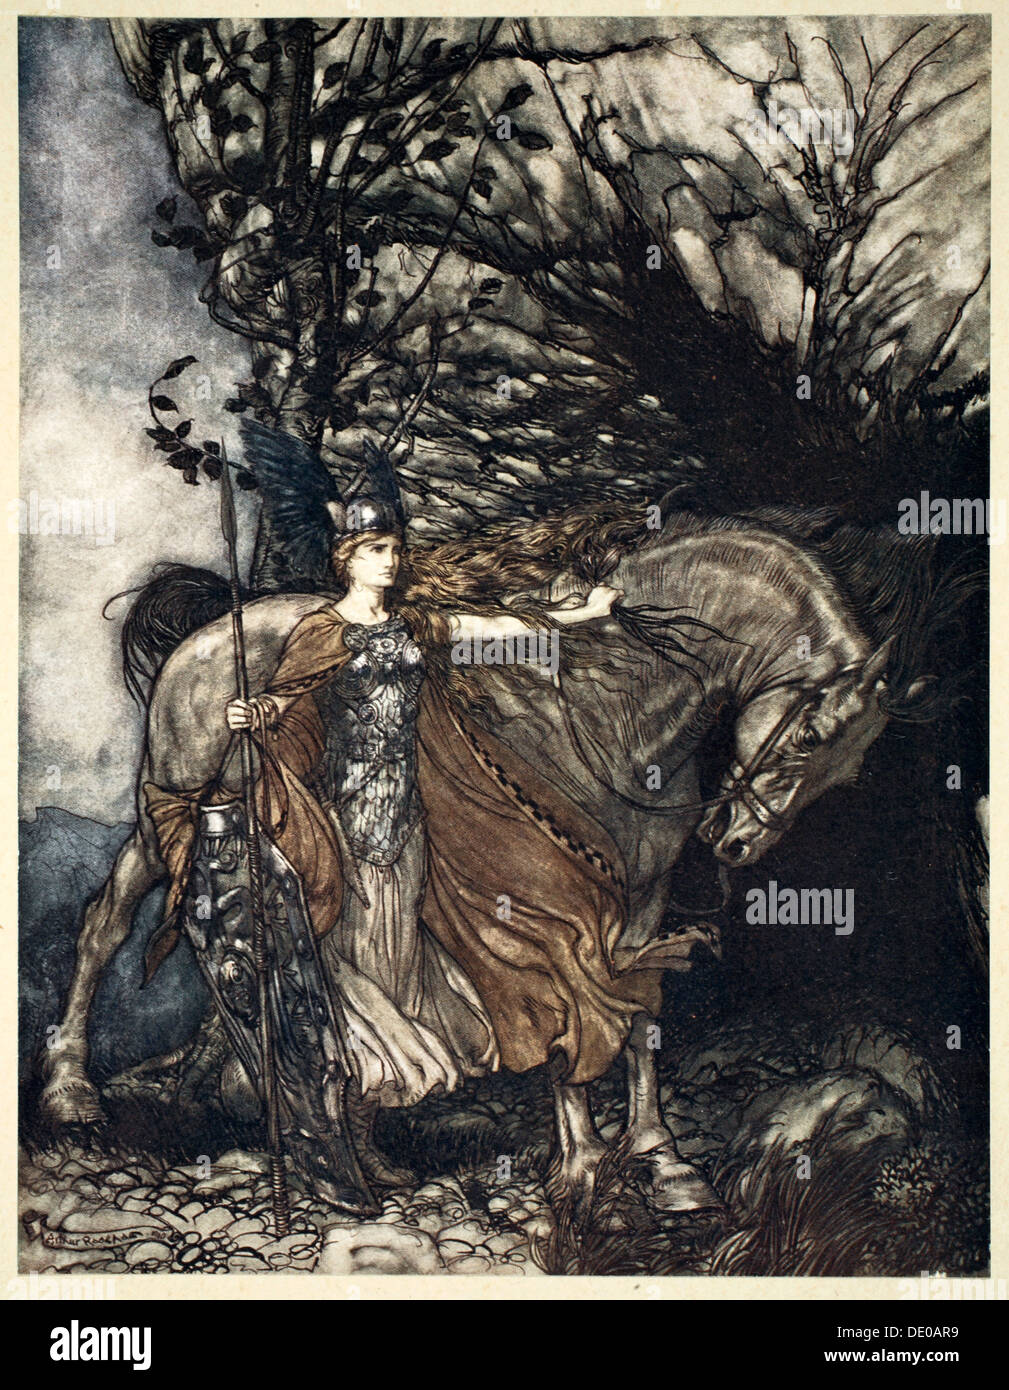 'Brunnhilde with her horse at the mouth of the cave', 1910.  Artist: Arthur Rackham Stock Photo